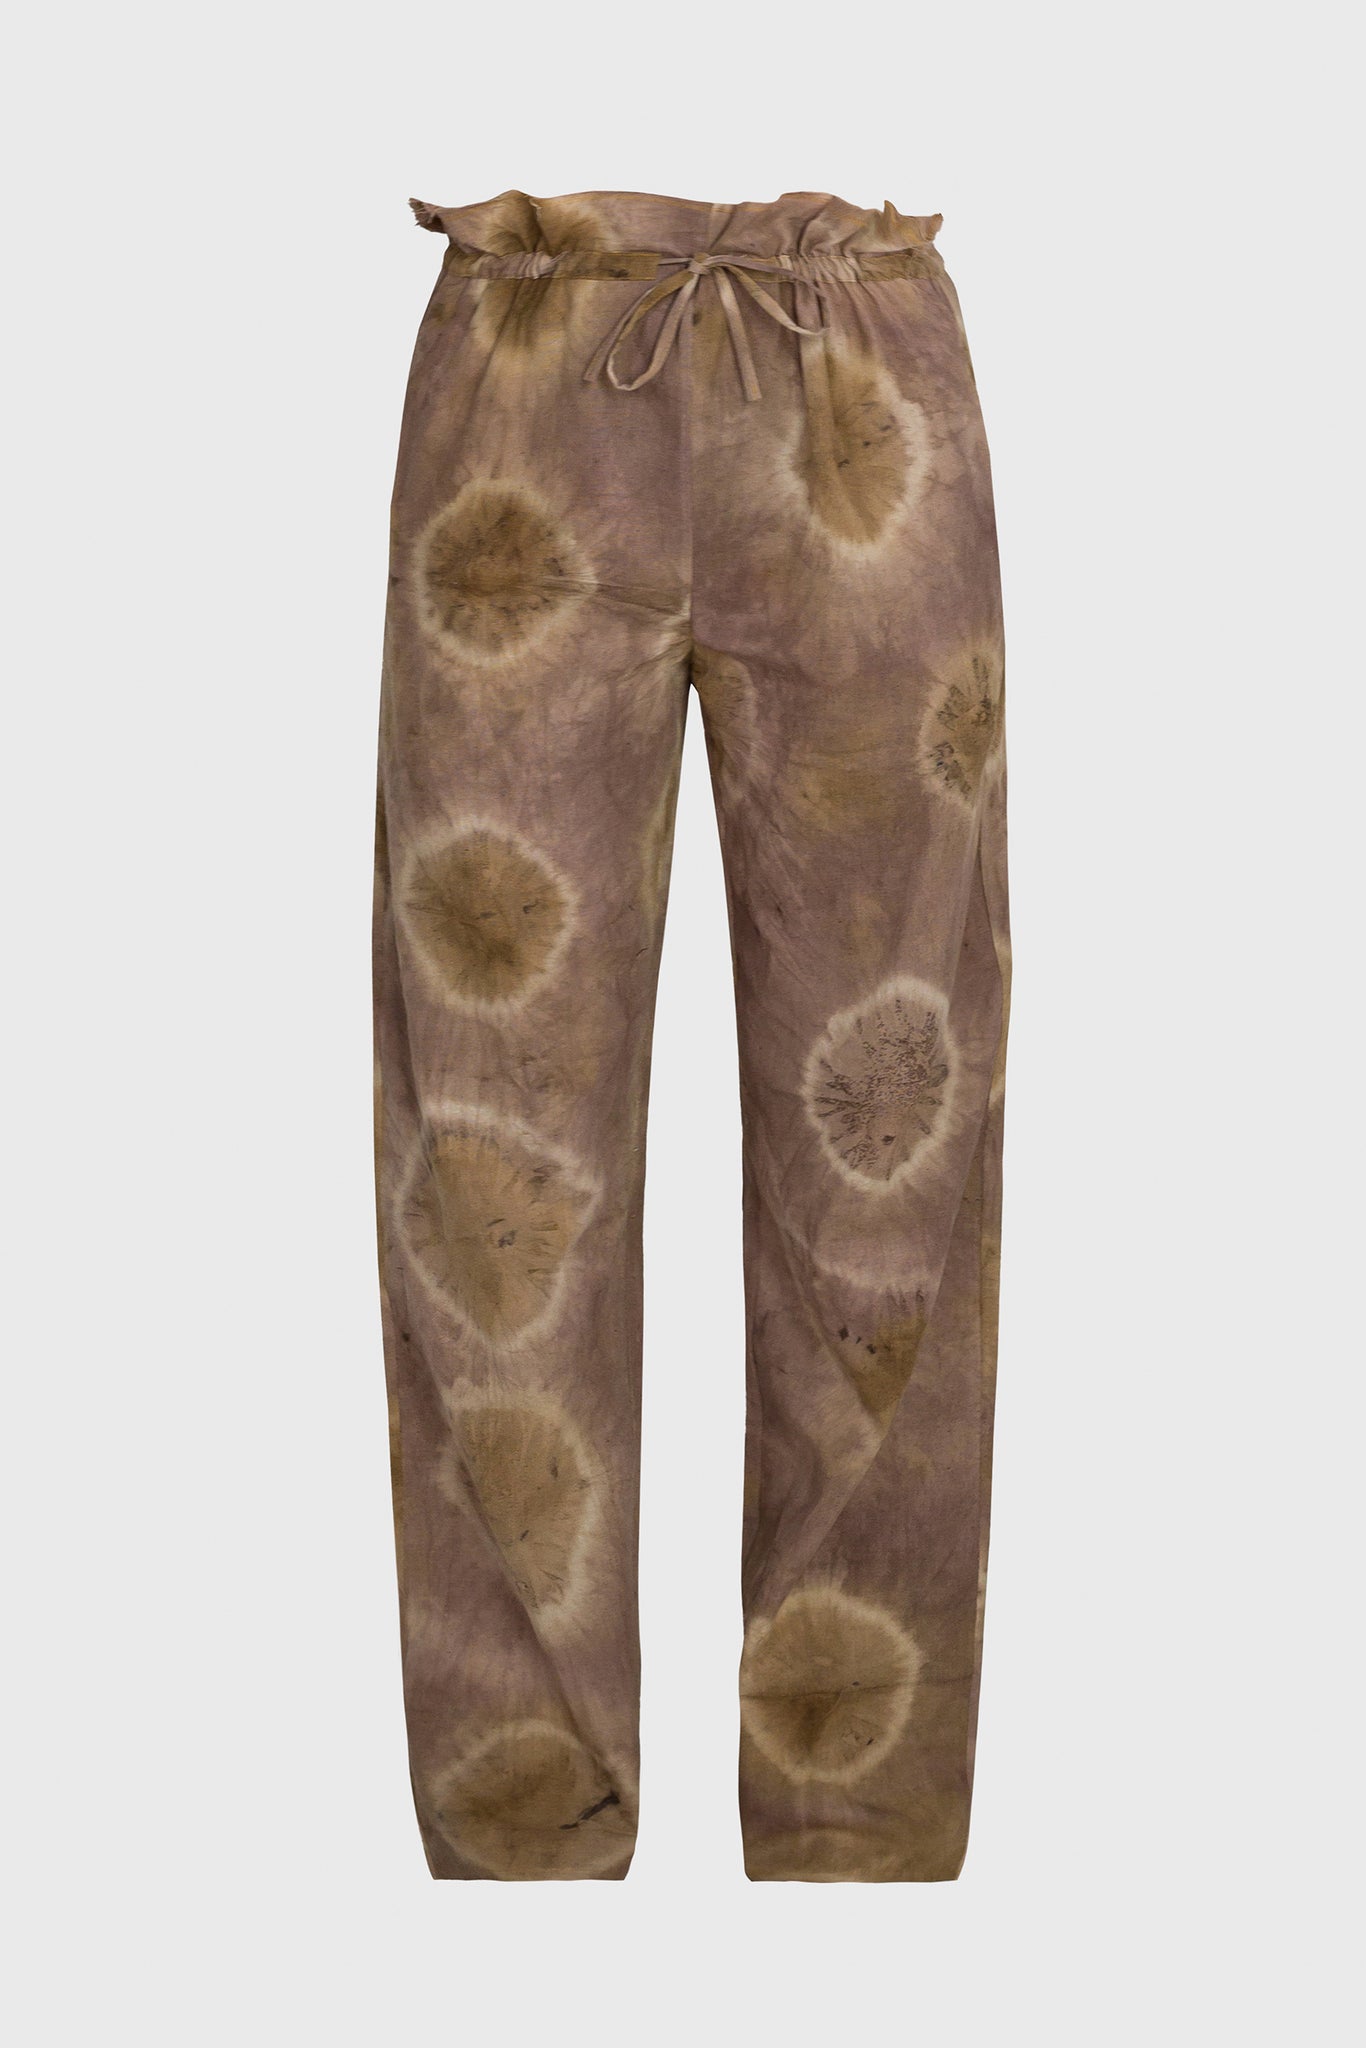 Ruxandra designed, women's shibori pants, naturally dyed with walnut, tied around the cloth, earth tones colors, easy going fit, string fastening, no zipper, all natural, sustainable fashion style